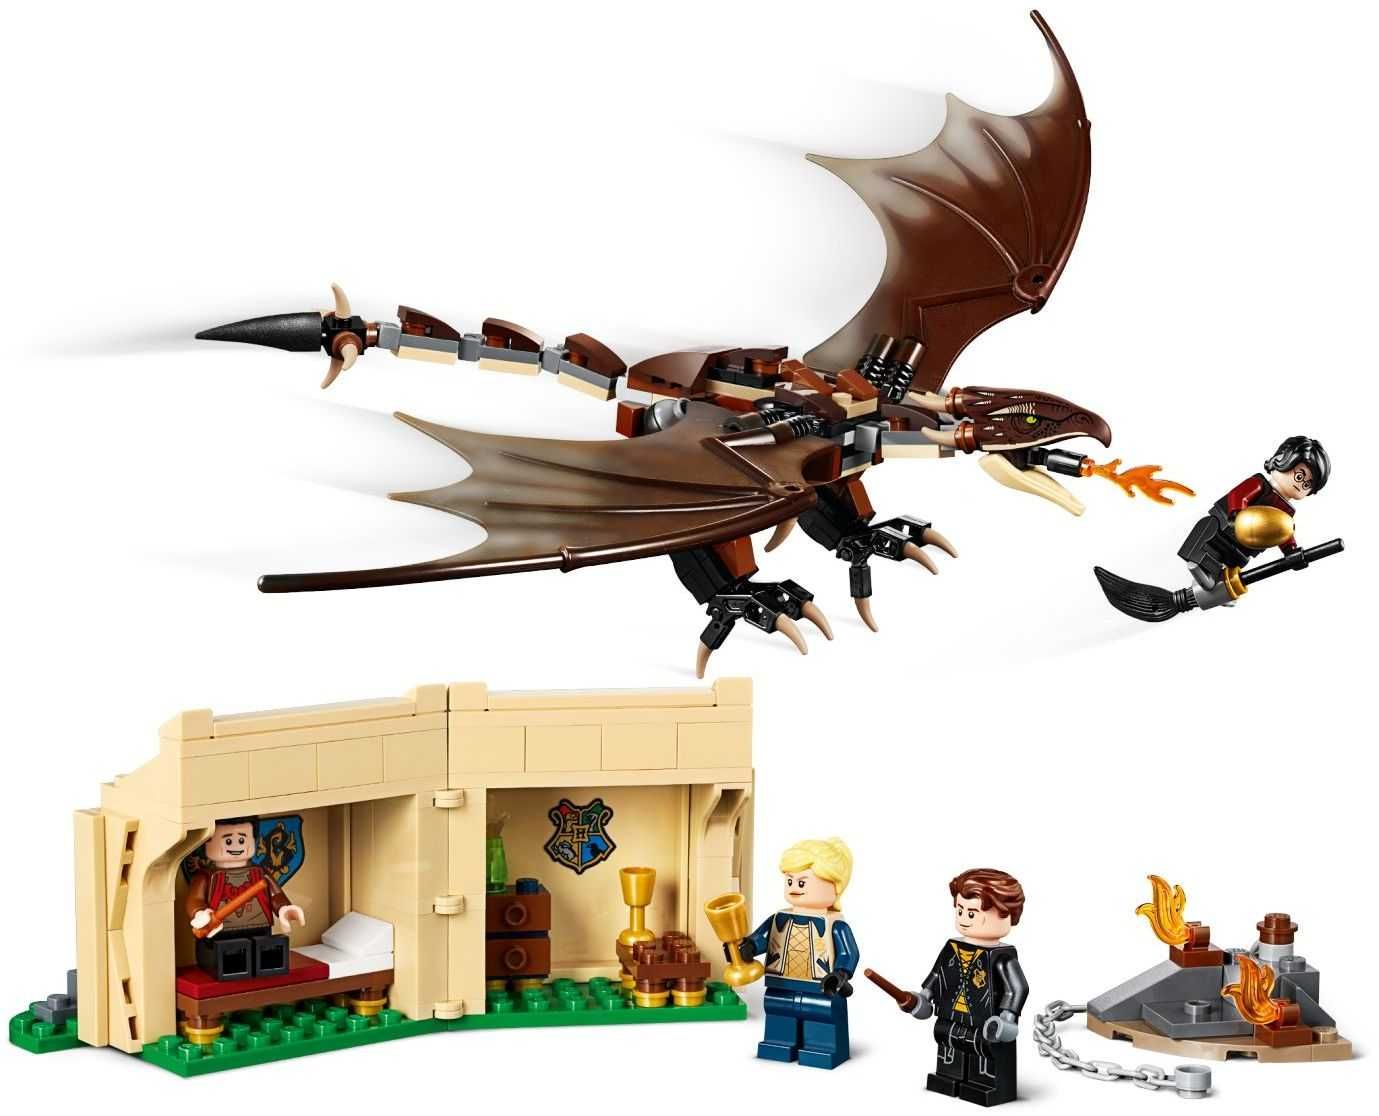 LEGO Harry Potter 75946 : Hungarian Horntail Triwizard Challenge -NOU